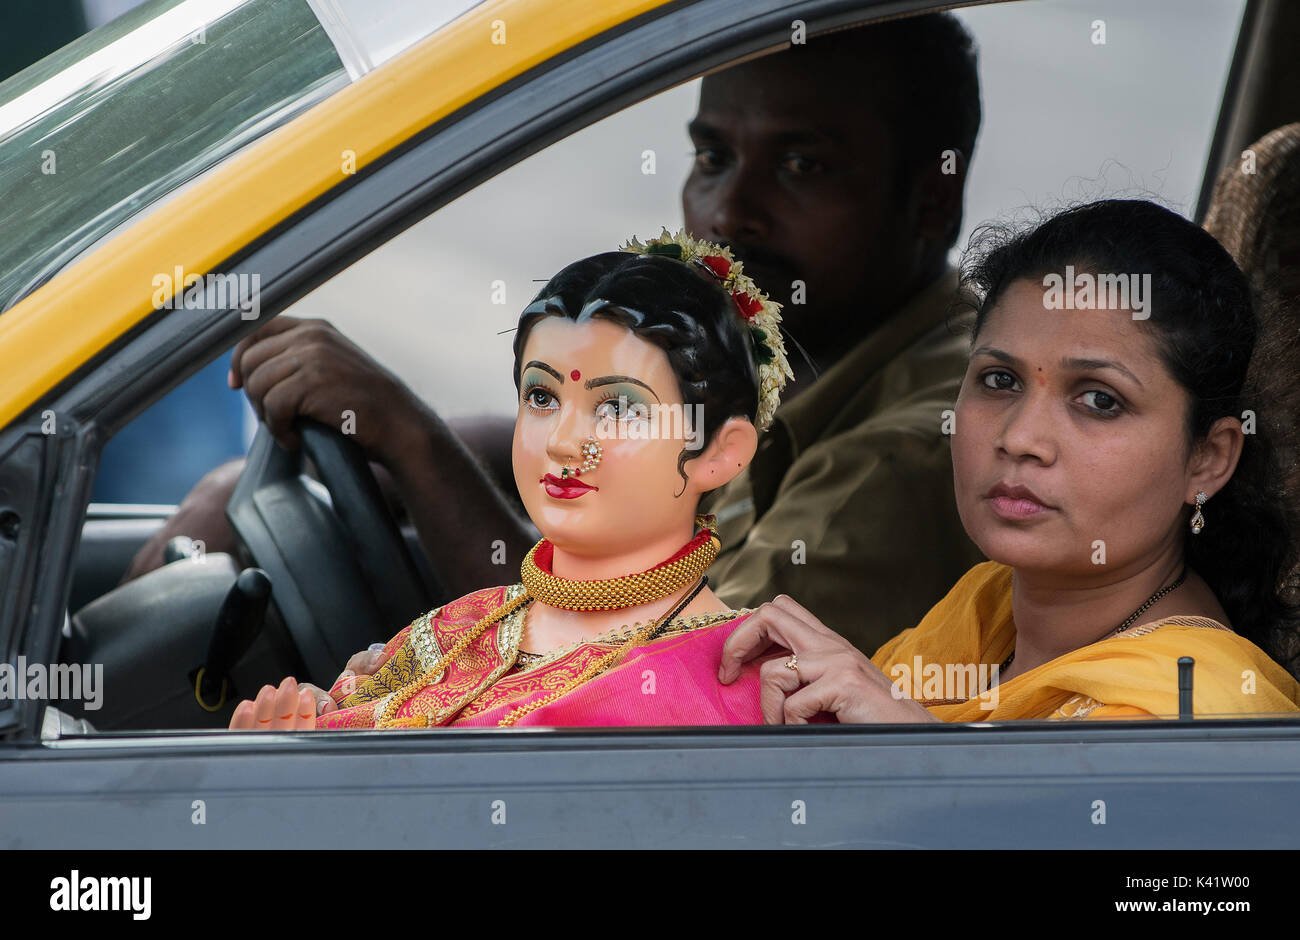 The image of Guari mother of Ganpati or Elephant headed lord in Car on way to immersion at Giraguam Chowpatty.Mumbai, India Stock Photo